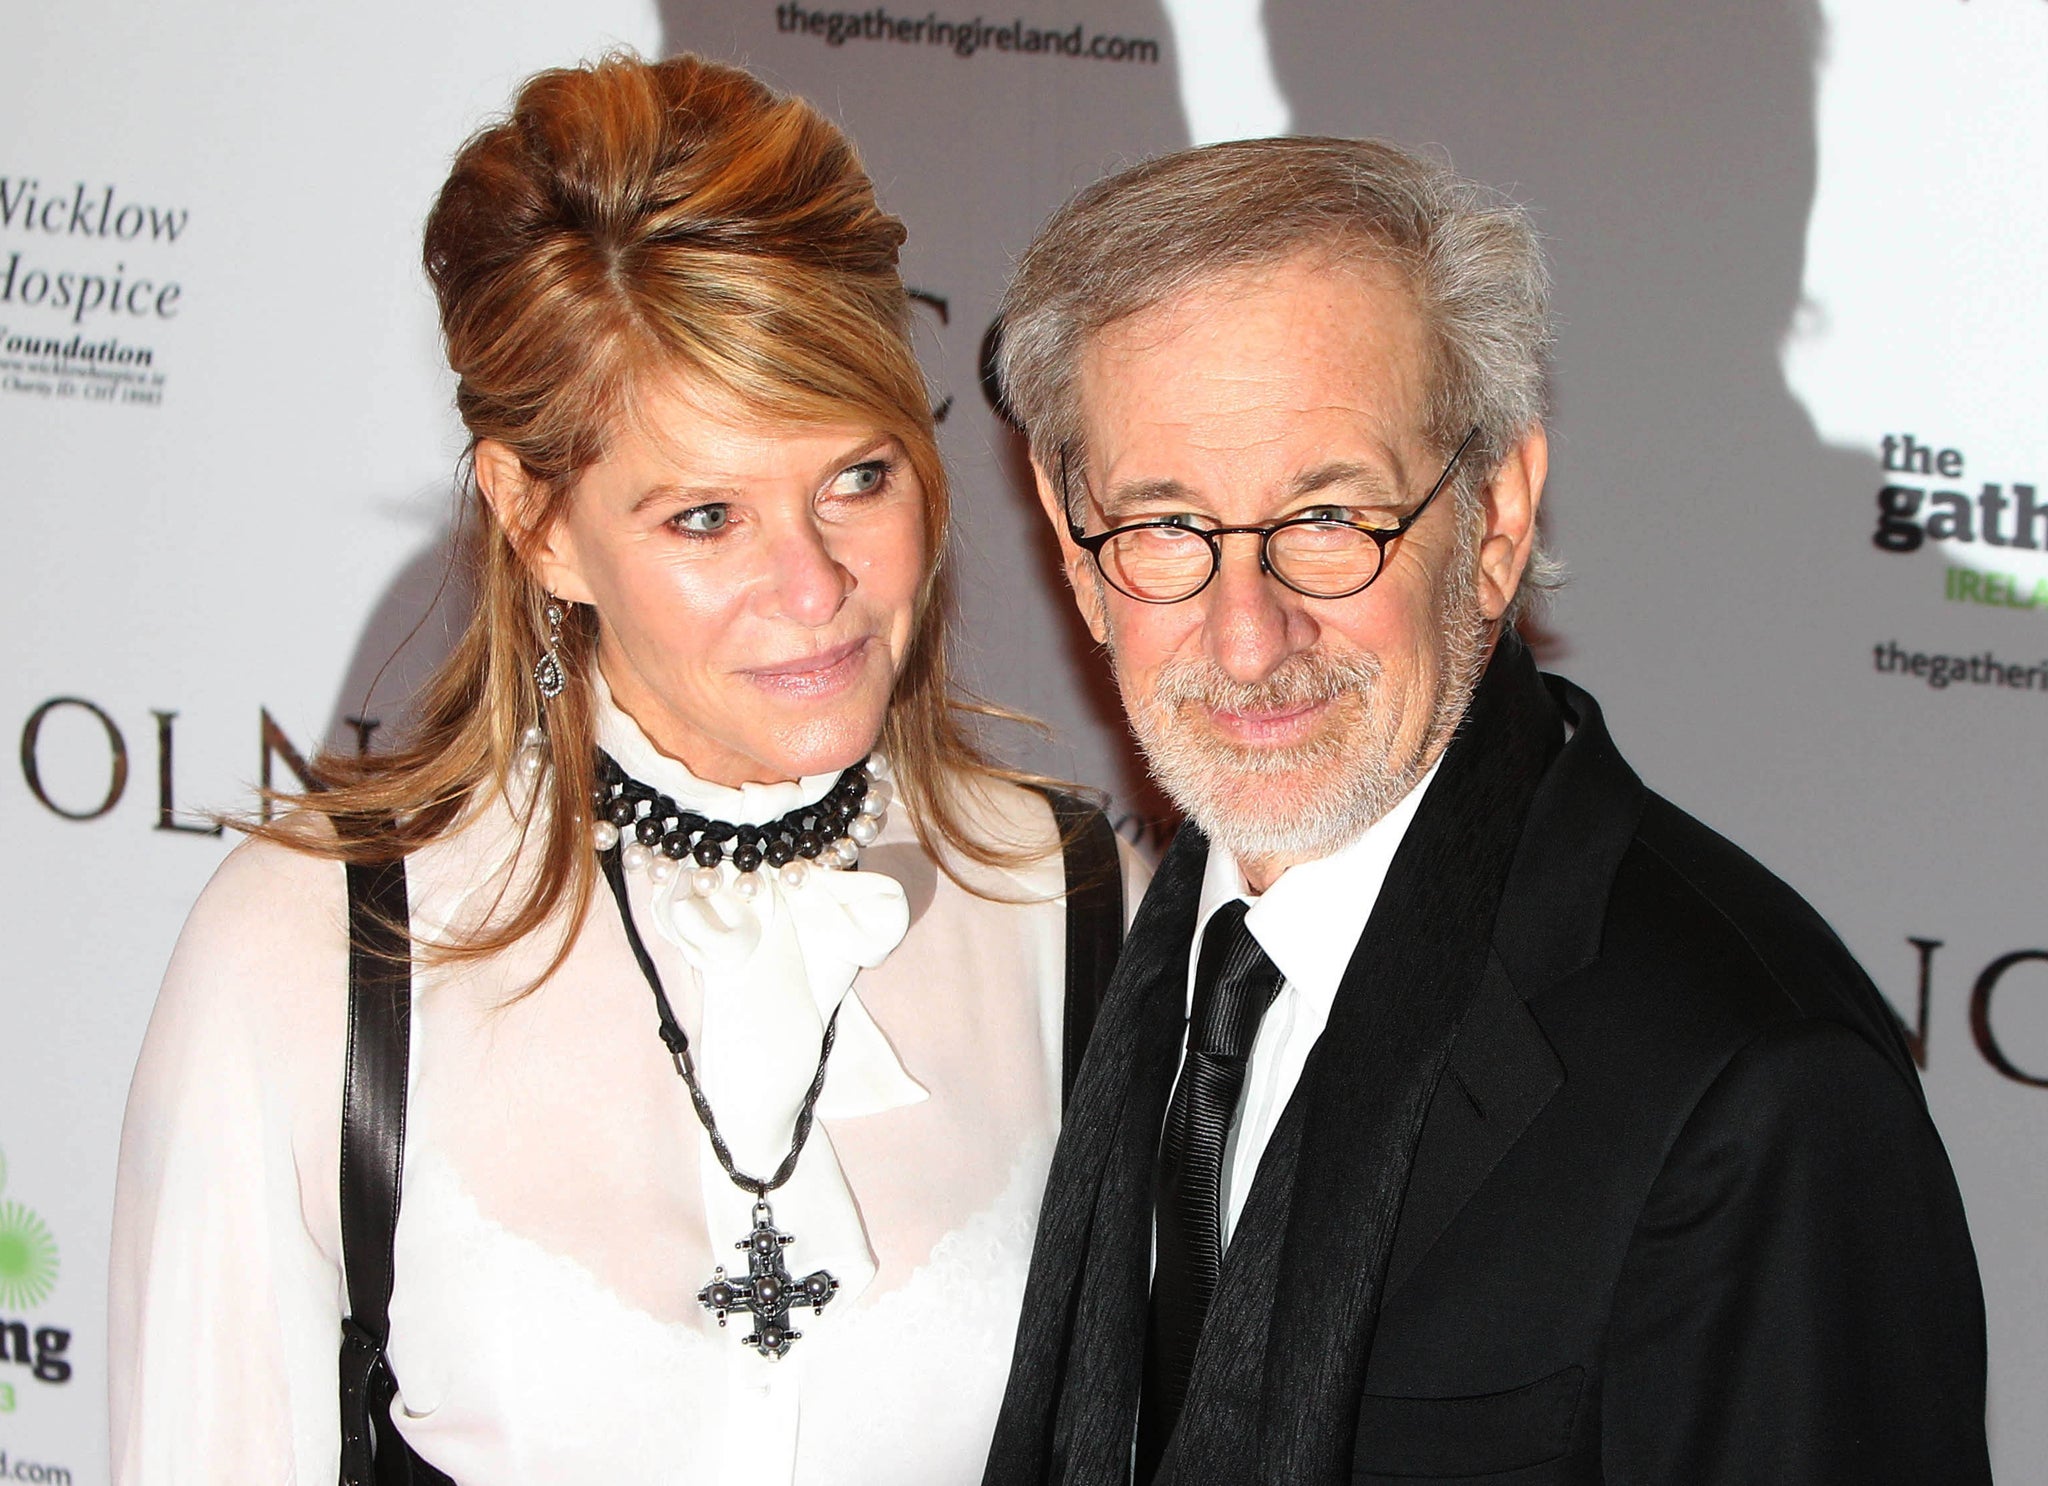 Kate Capshaw and Steven Spielberg at the Savoy cinema in Dublin, for the European premiere of Lincoln.